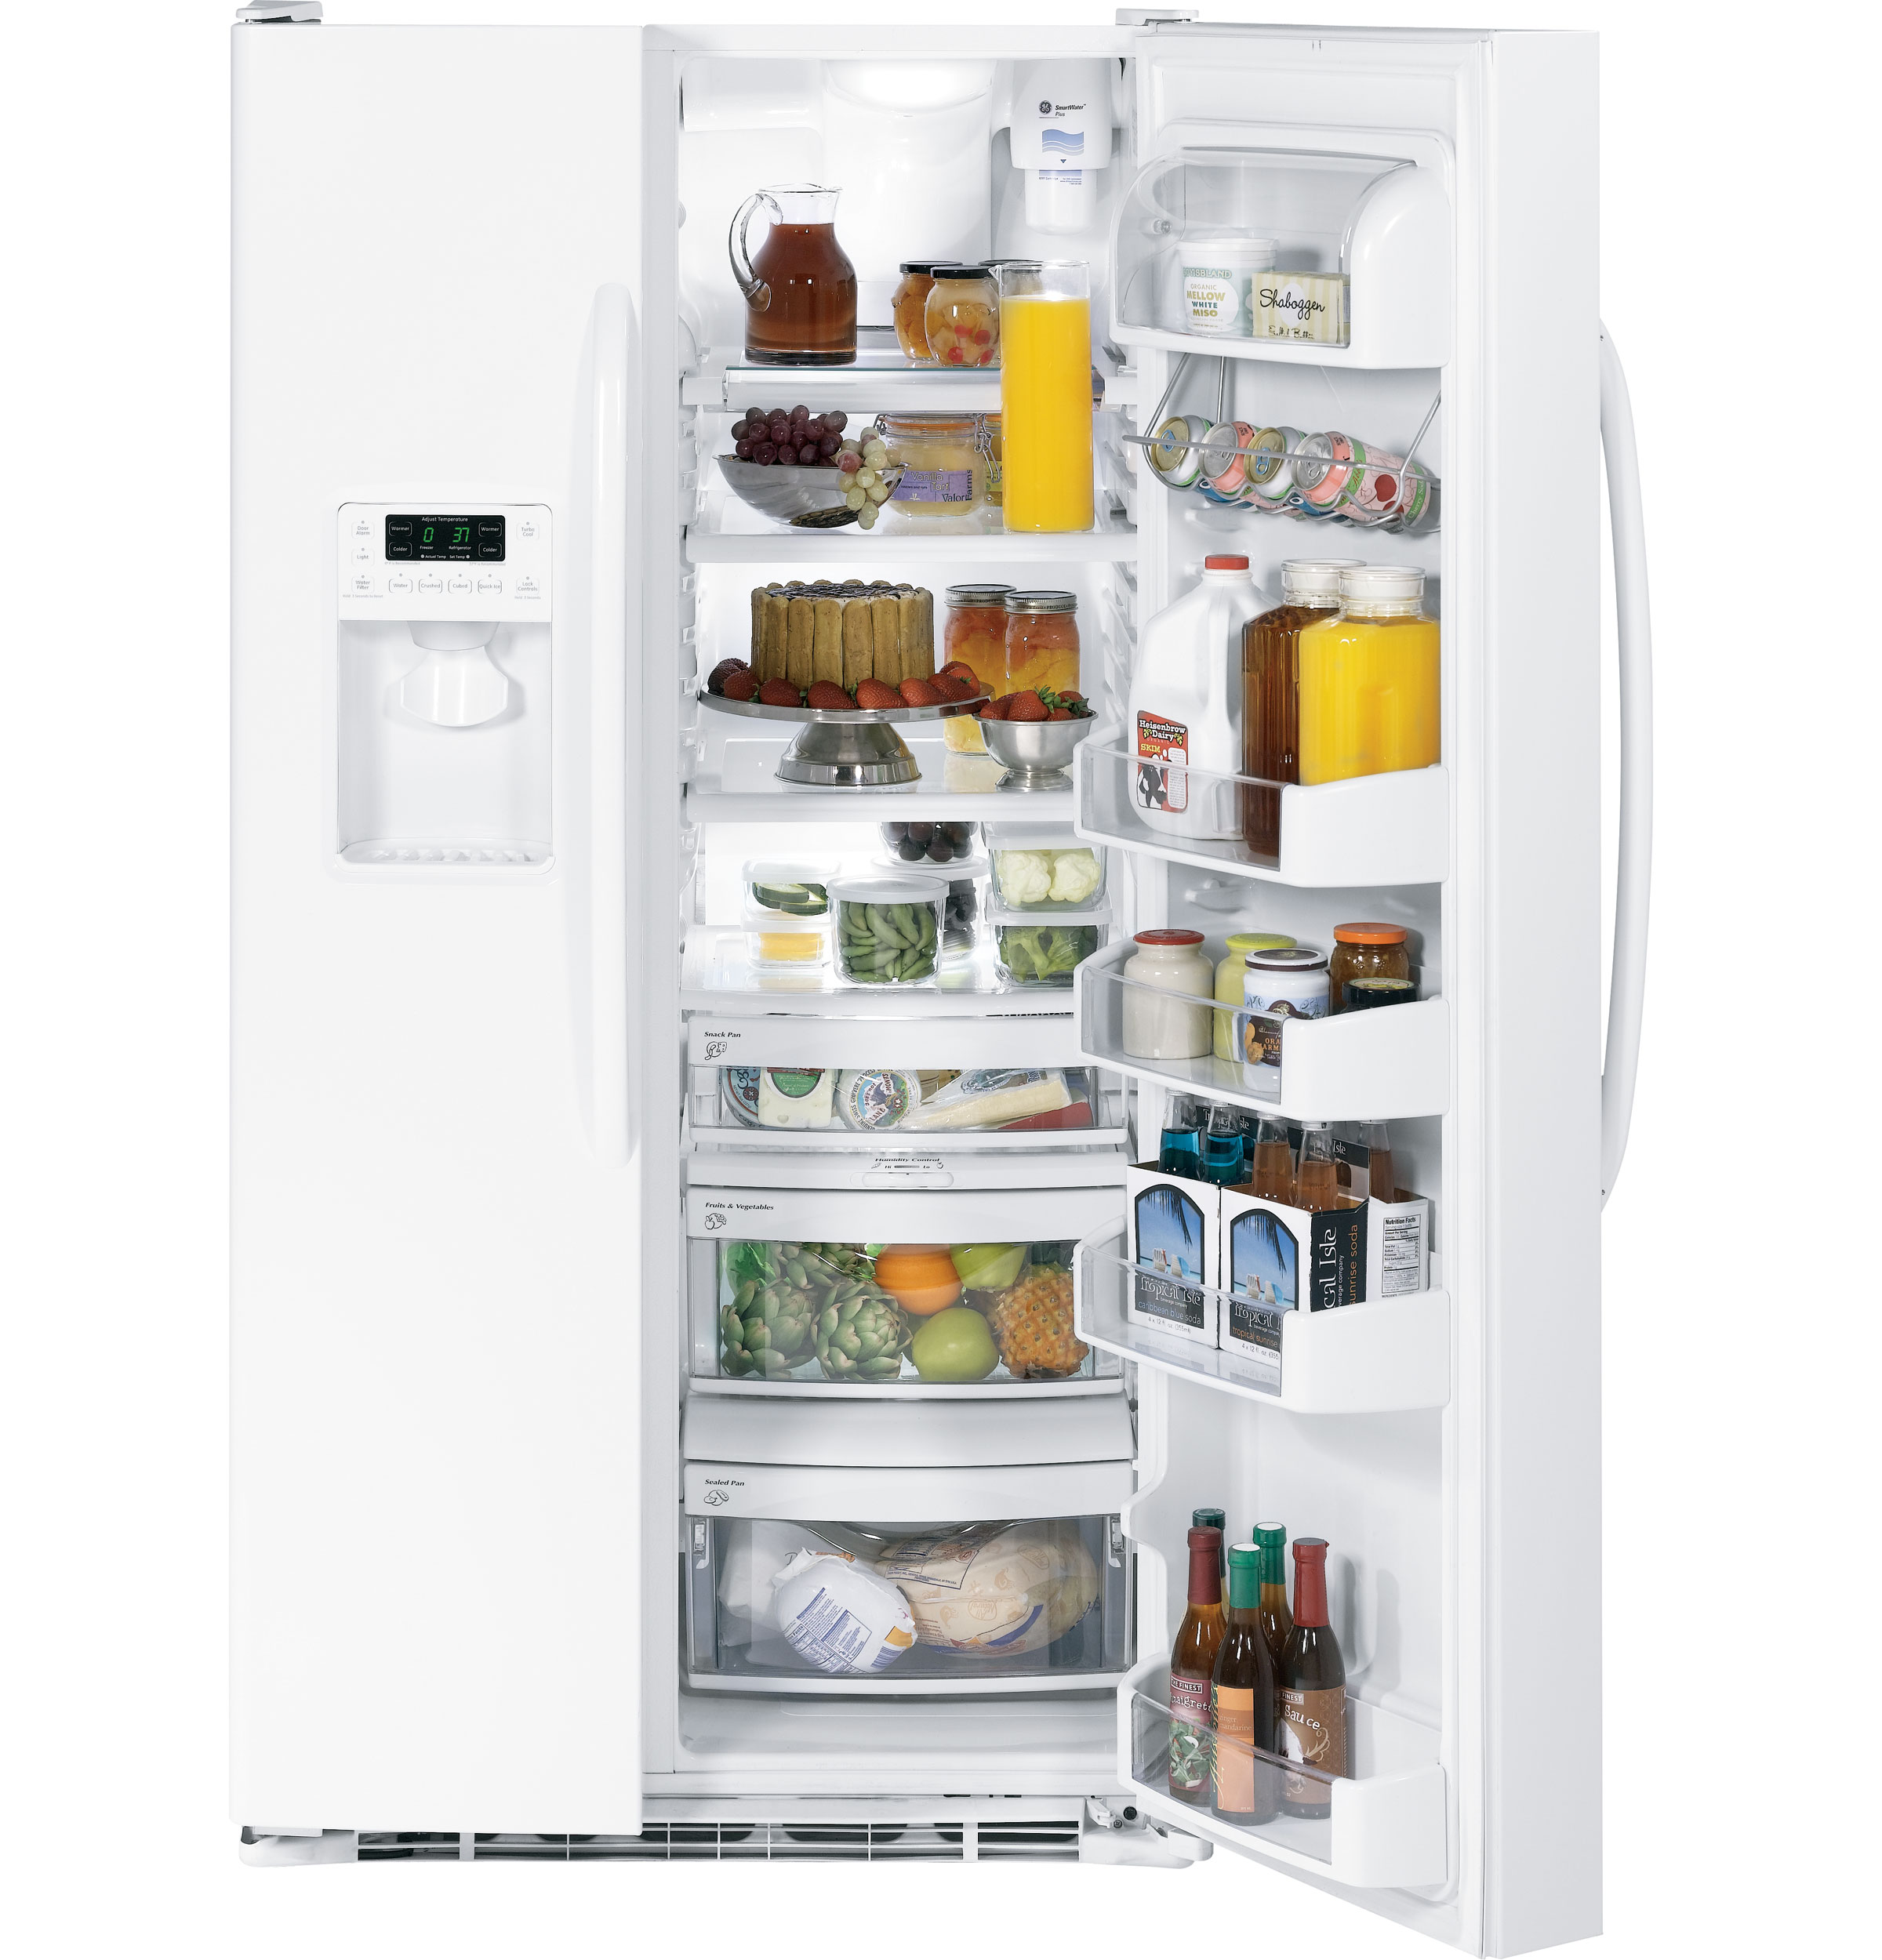 GE® ENERGY STAR® 29.1 Cu. Ft. Side-by-Side Refrigerator with Integrated Dispenser